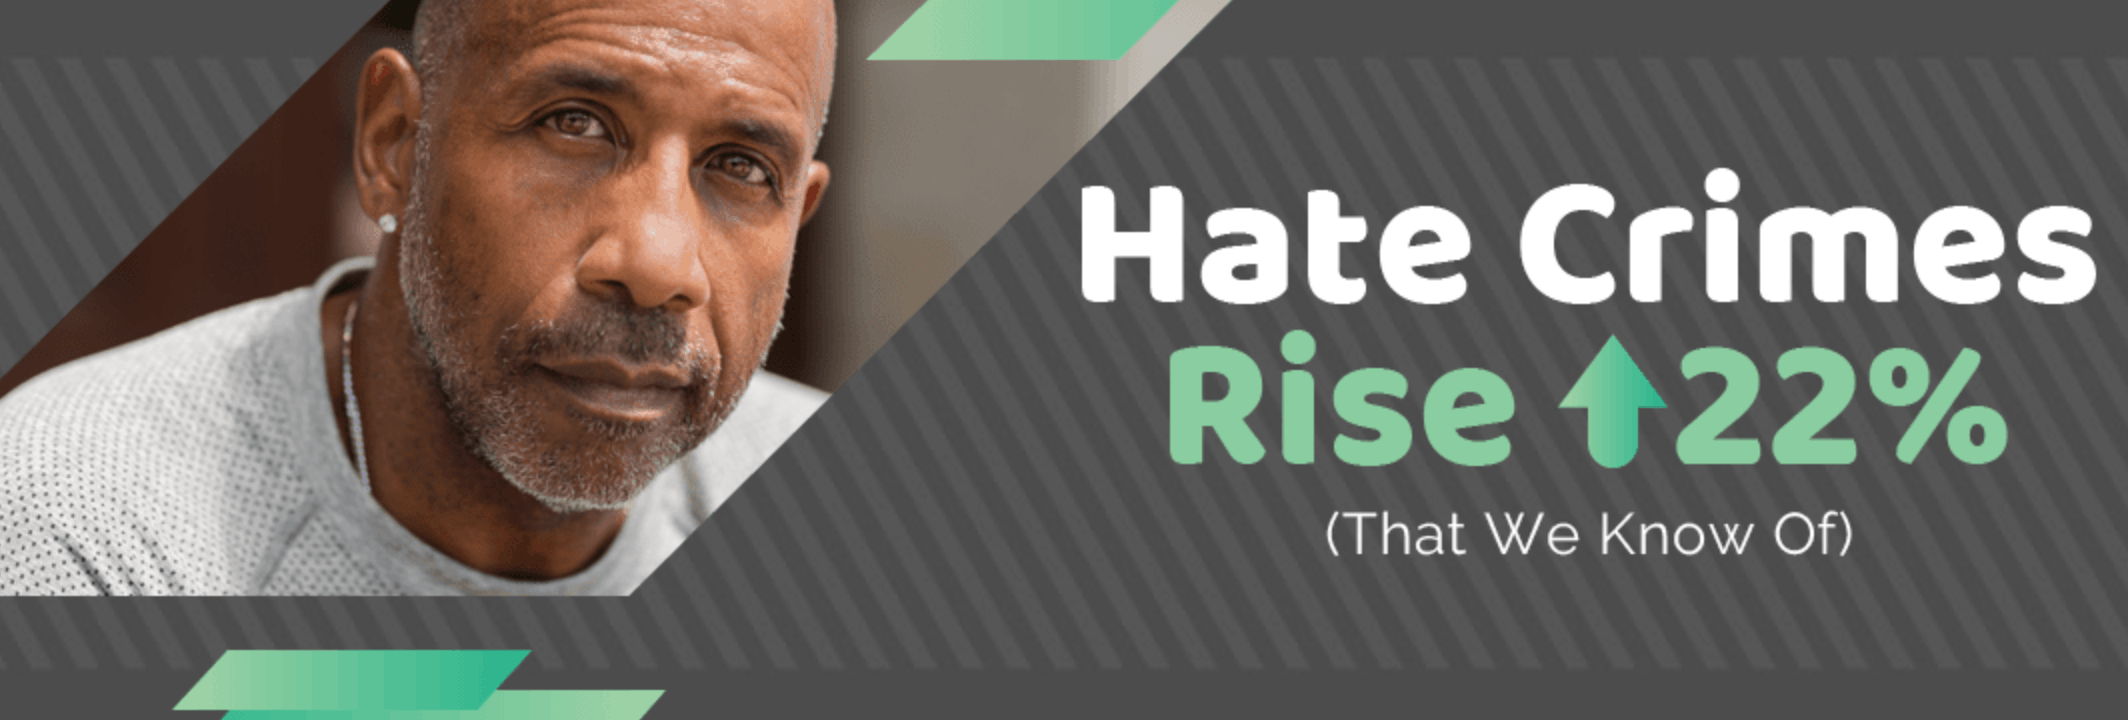 Hate Crimes Rise 22% — That We Know Of Featured Image